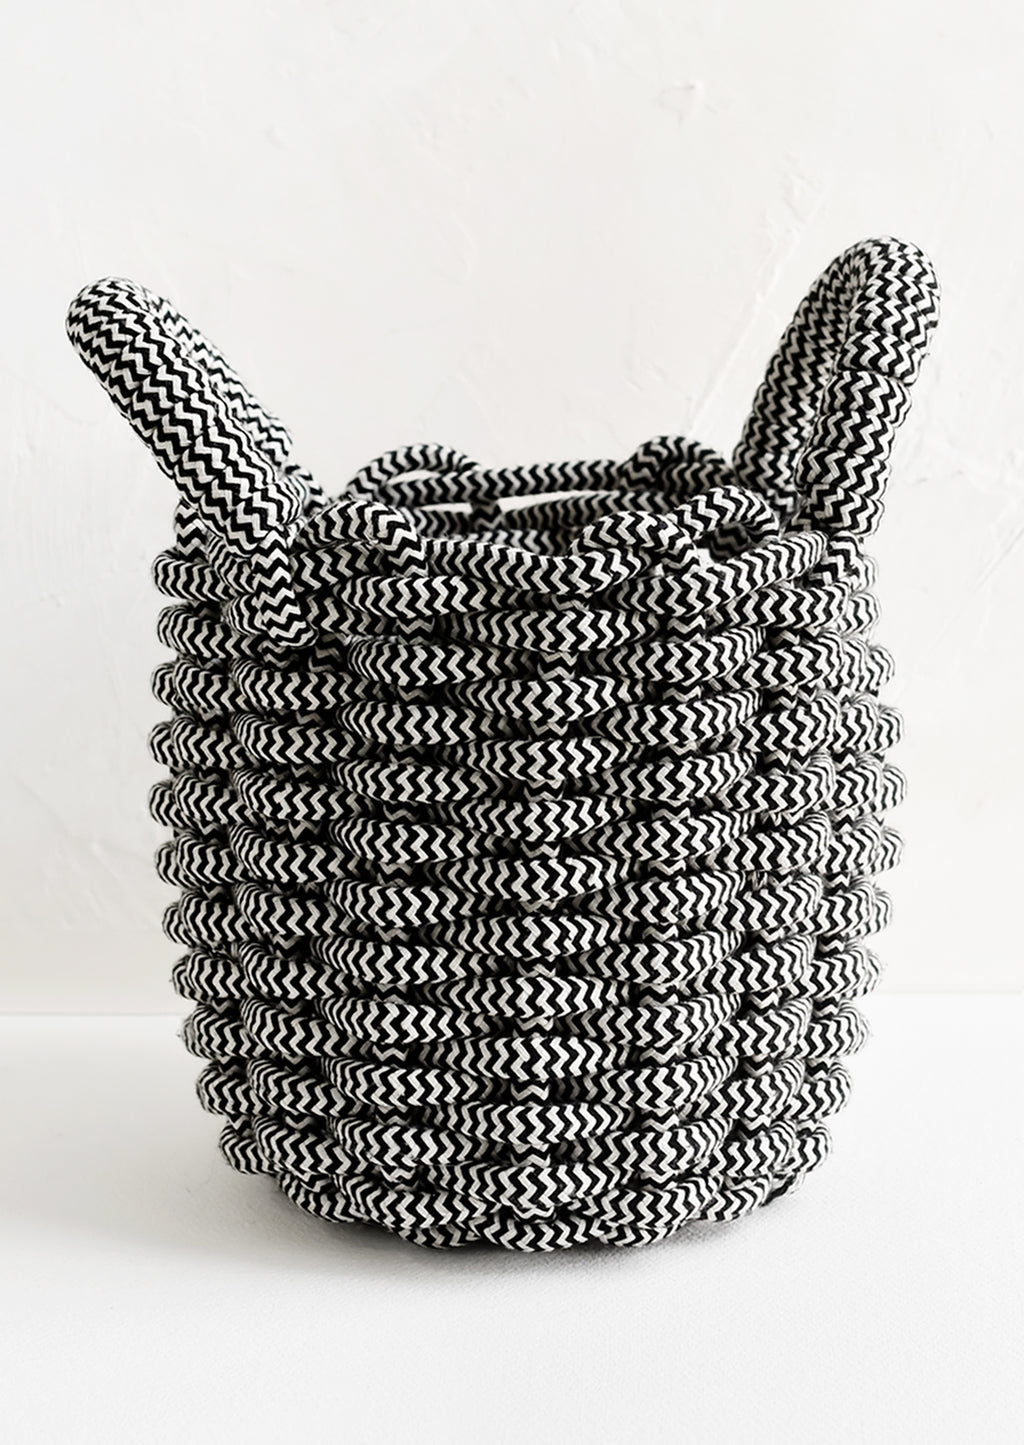 1: A black and white woven rope basket with top handles.